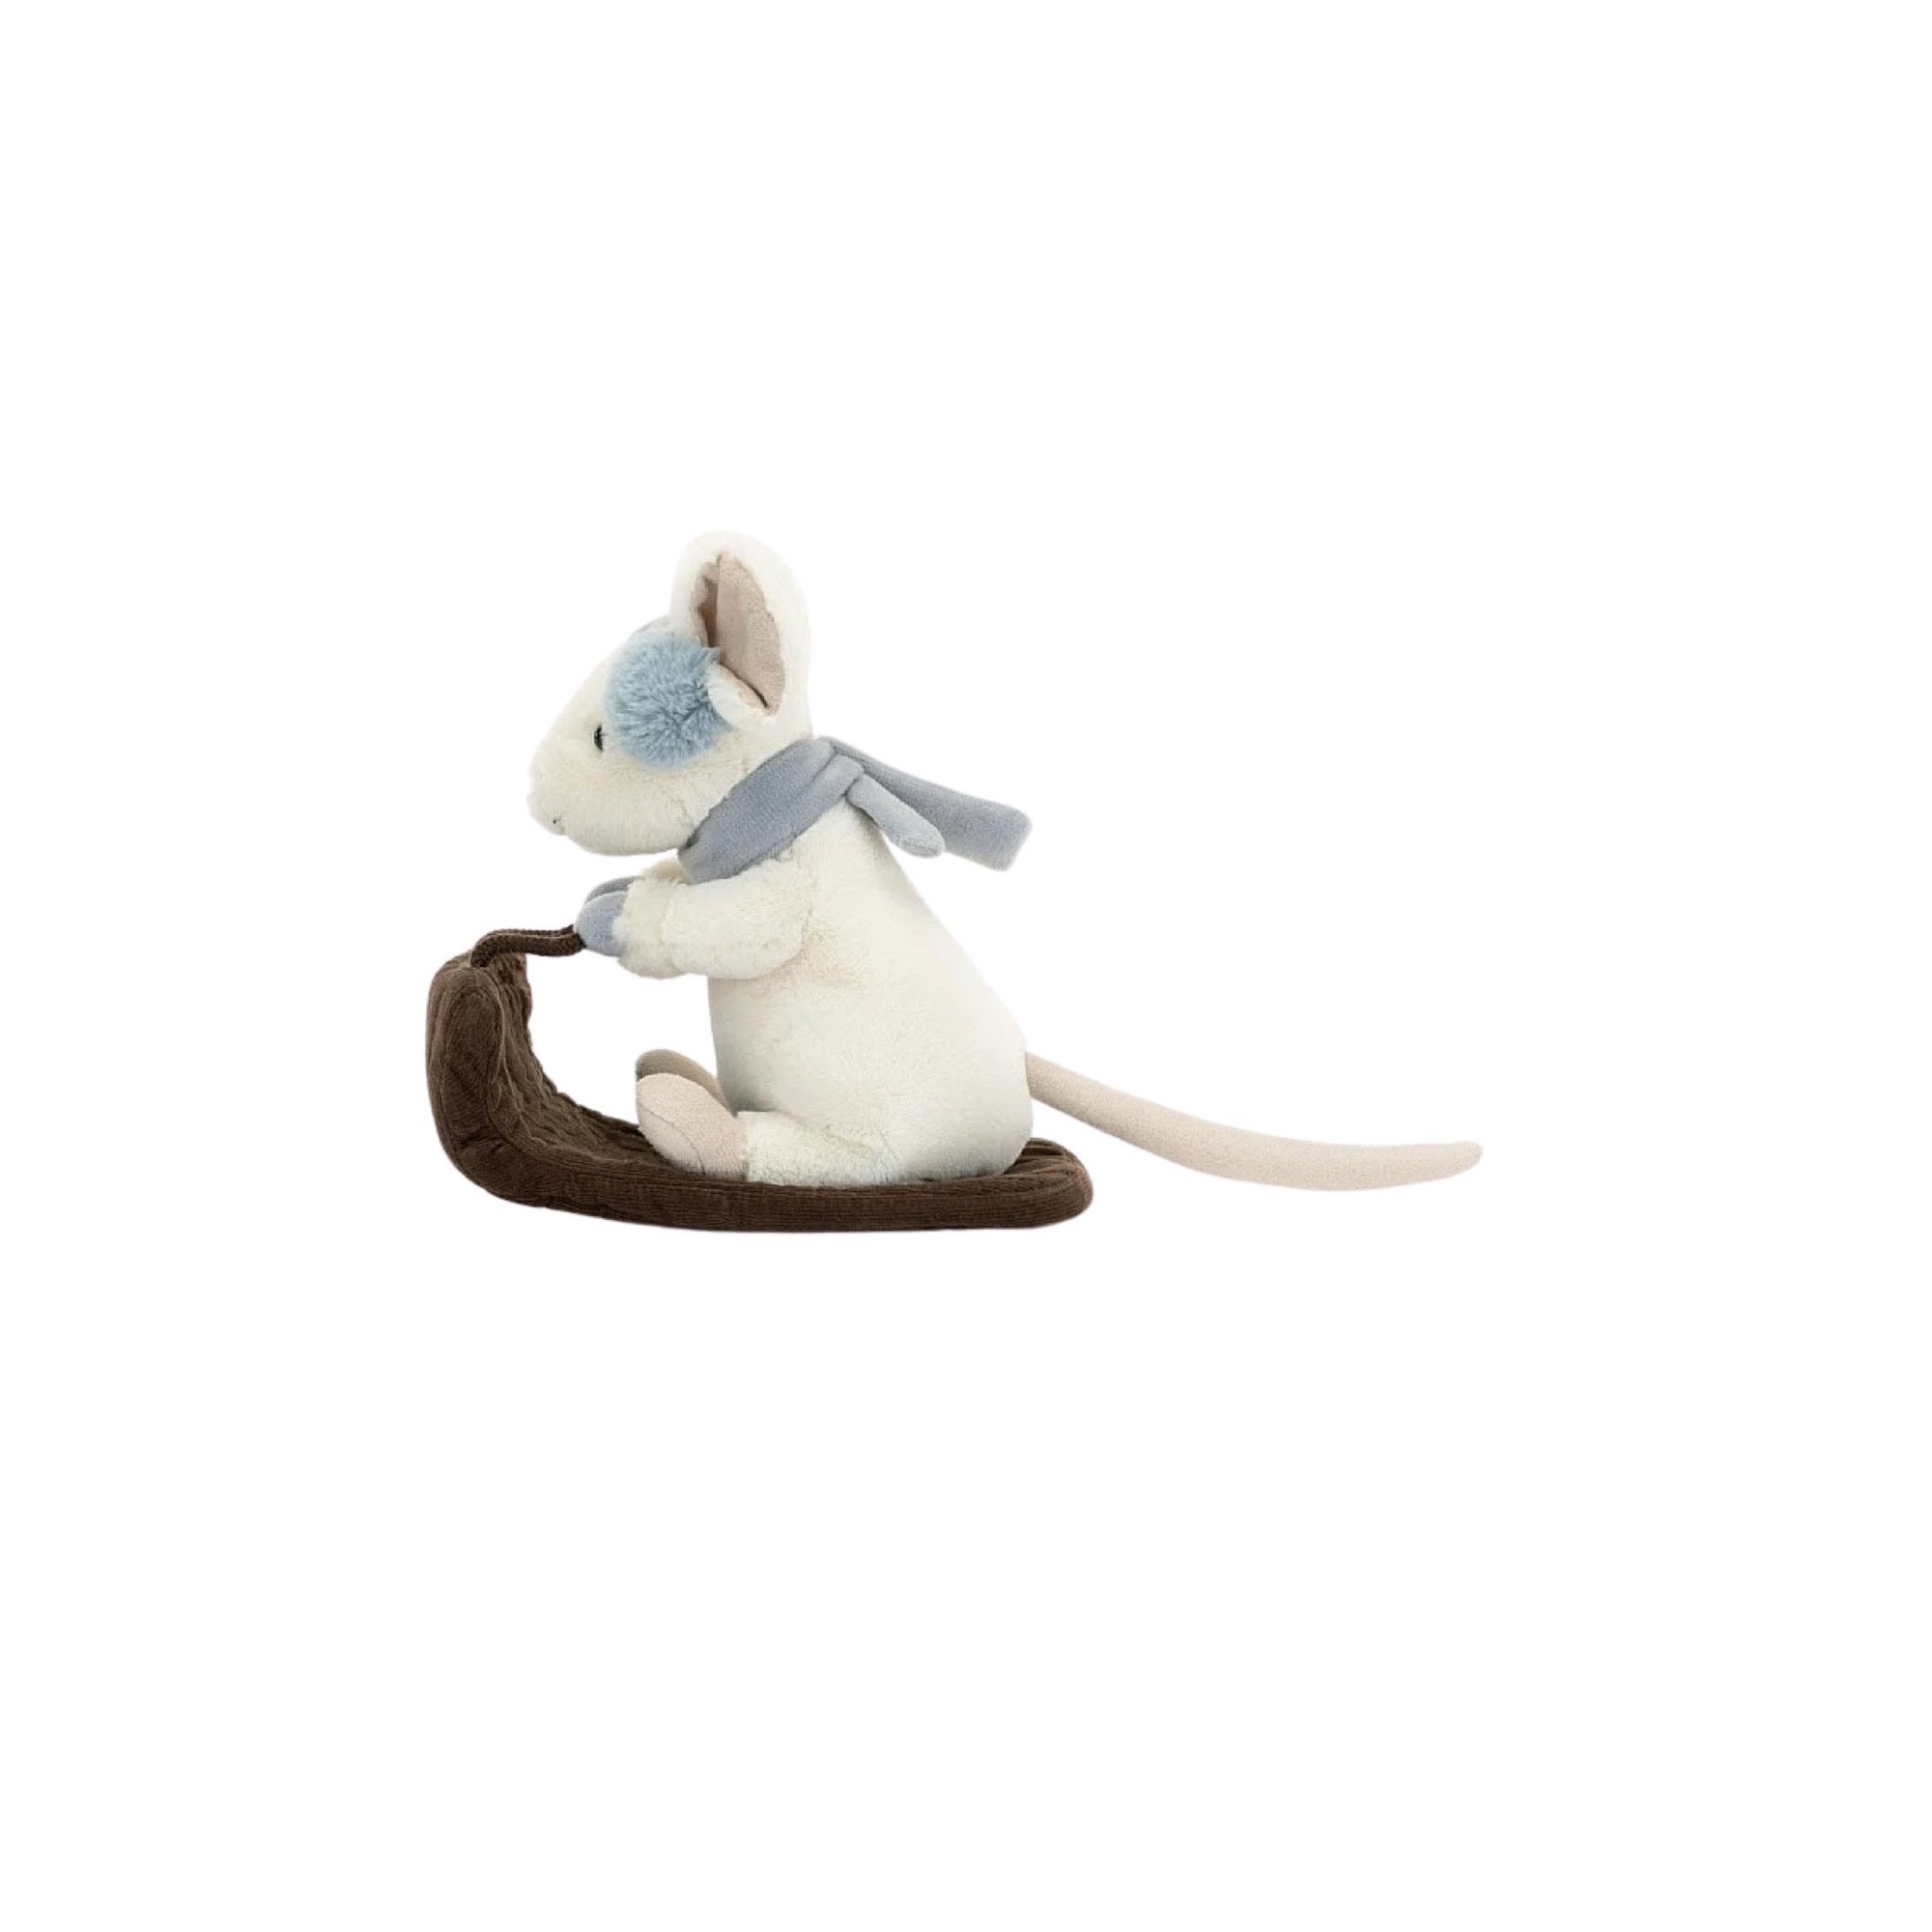 Merry Mouse Sleighing Plush